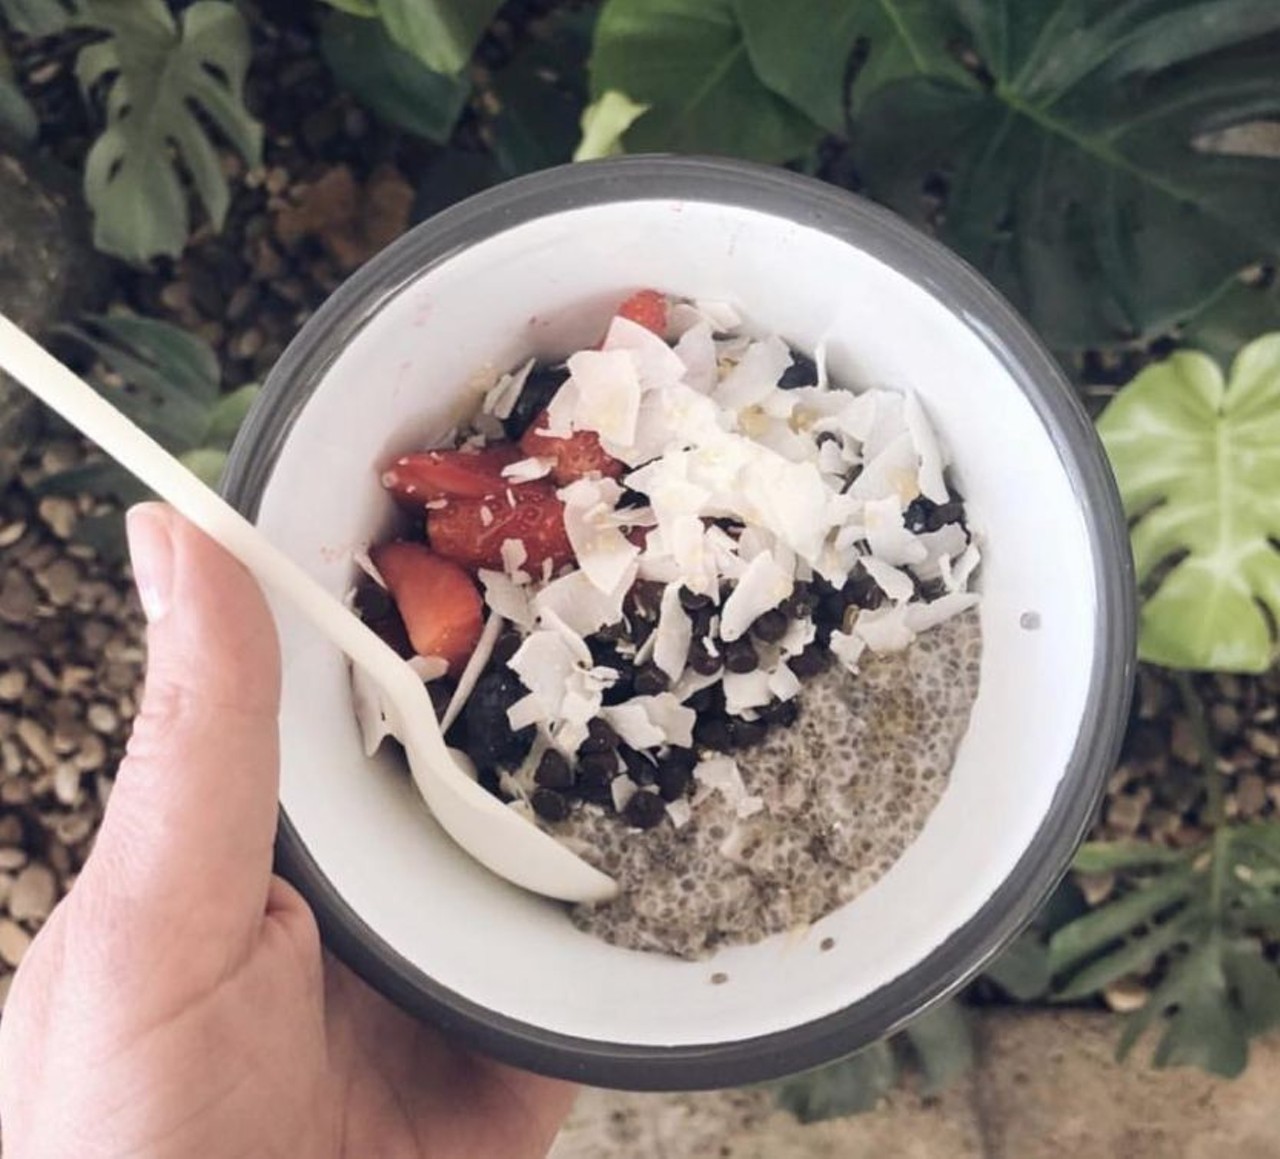 Must try: Coconut Chia Pudding
Photo via New General/Facebook